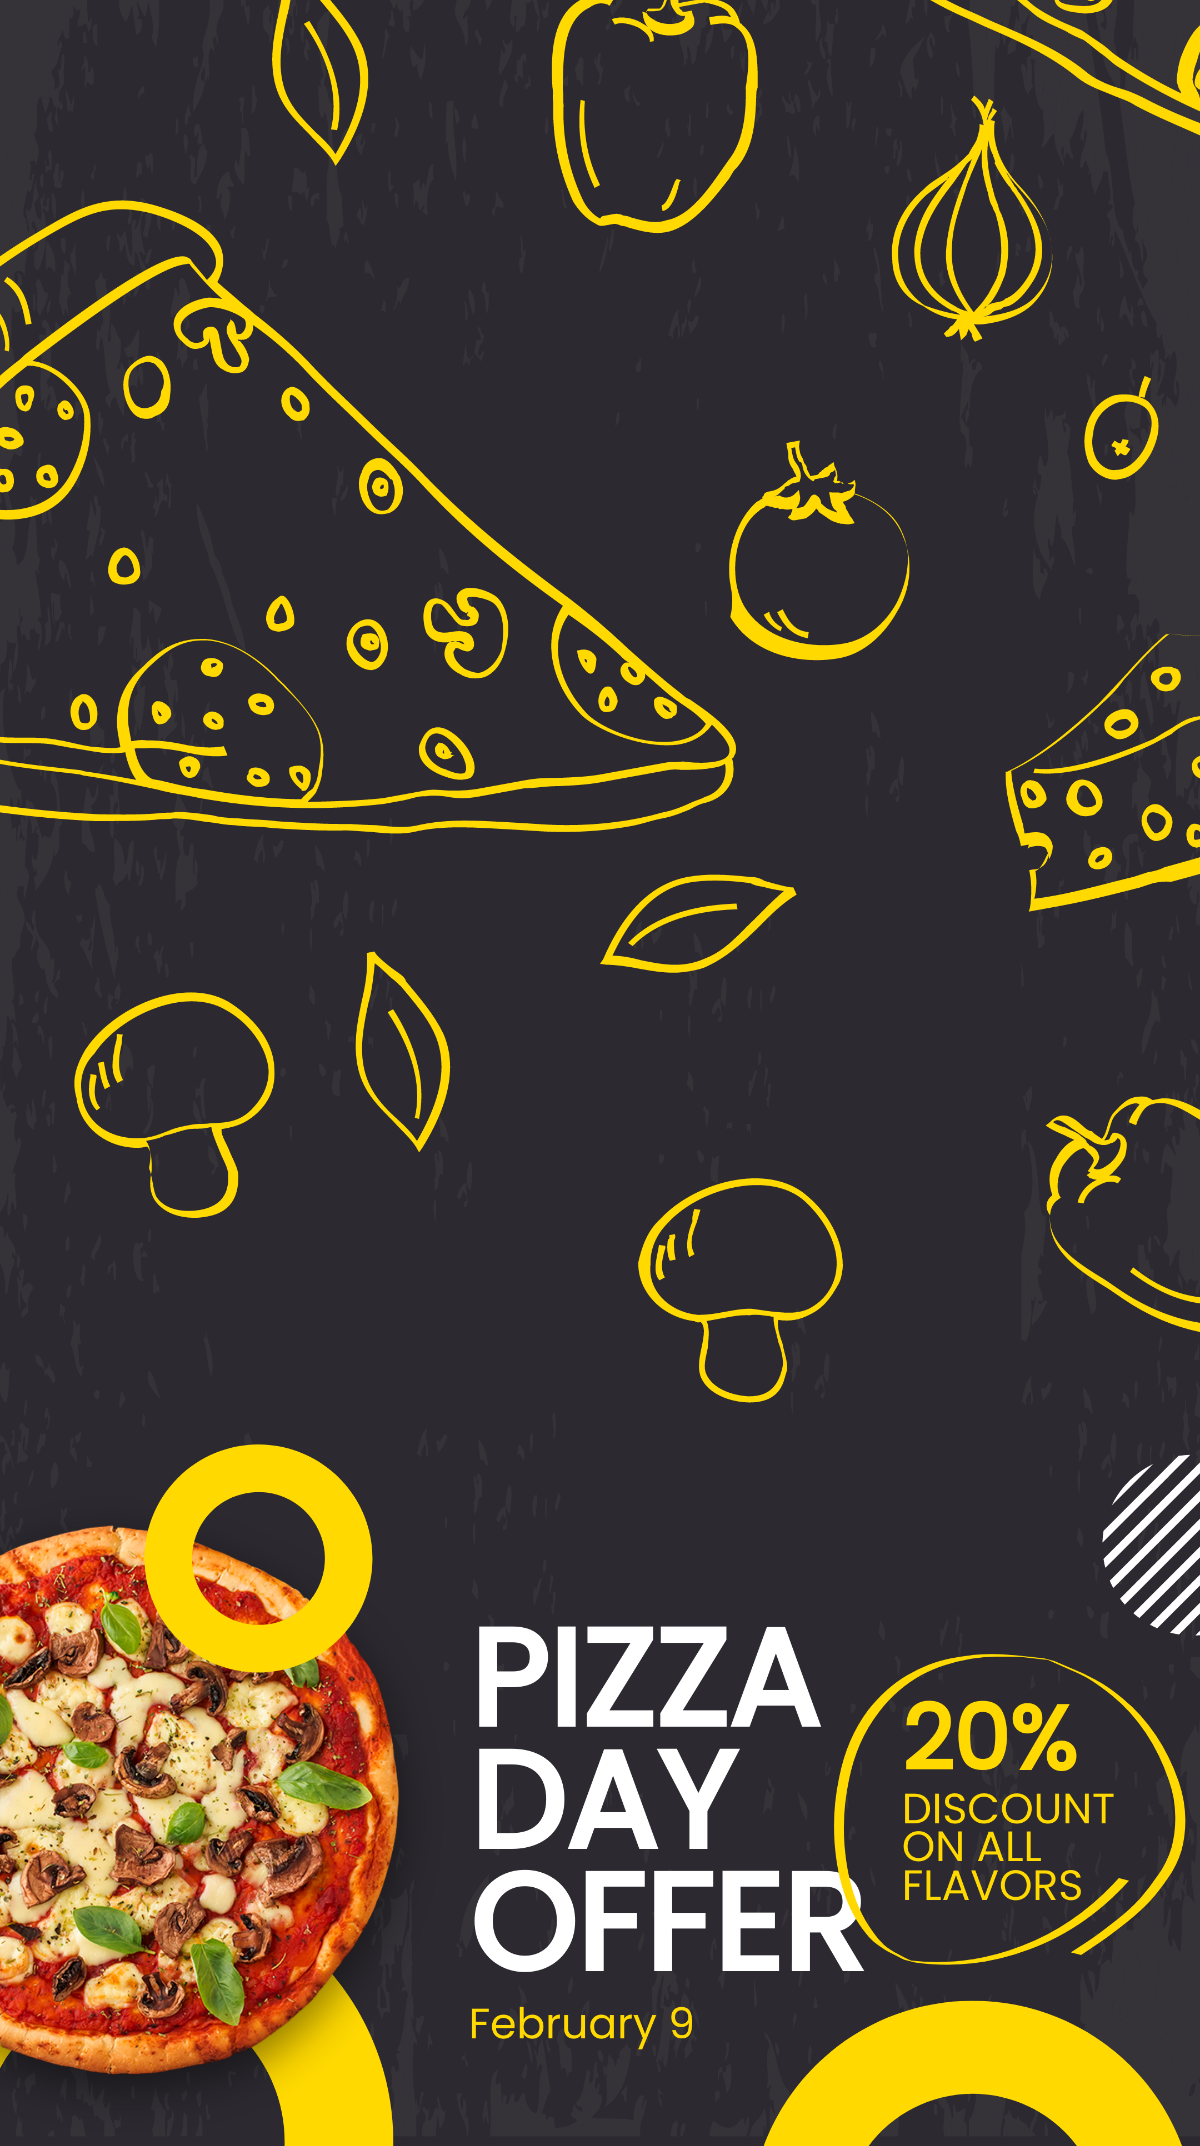 Pizza Day Offer Snapchat Geofilter Template